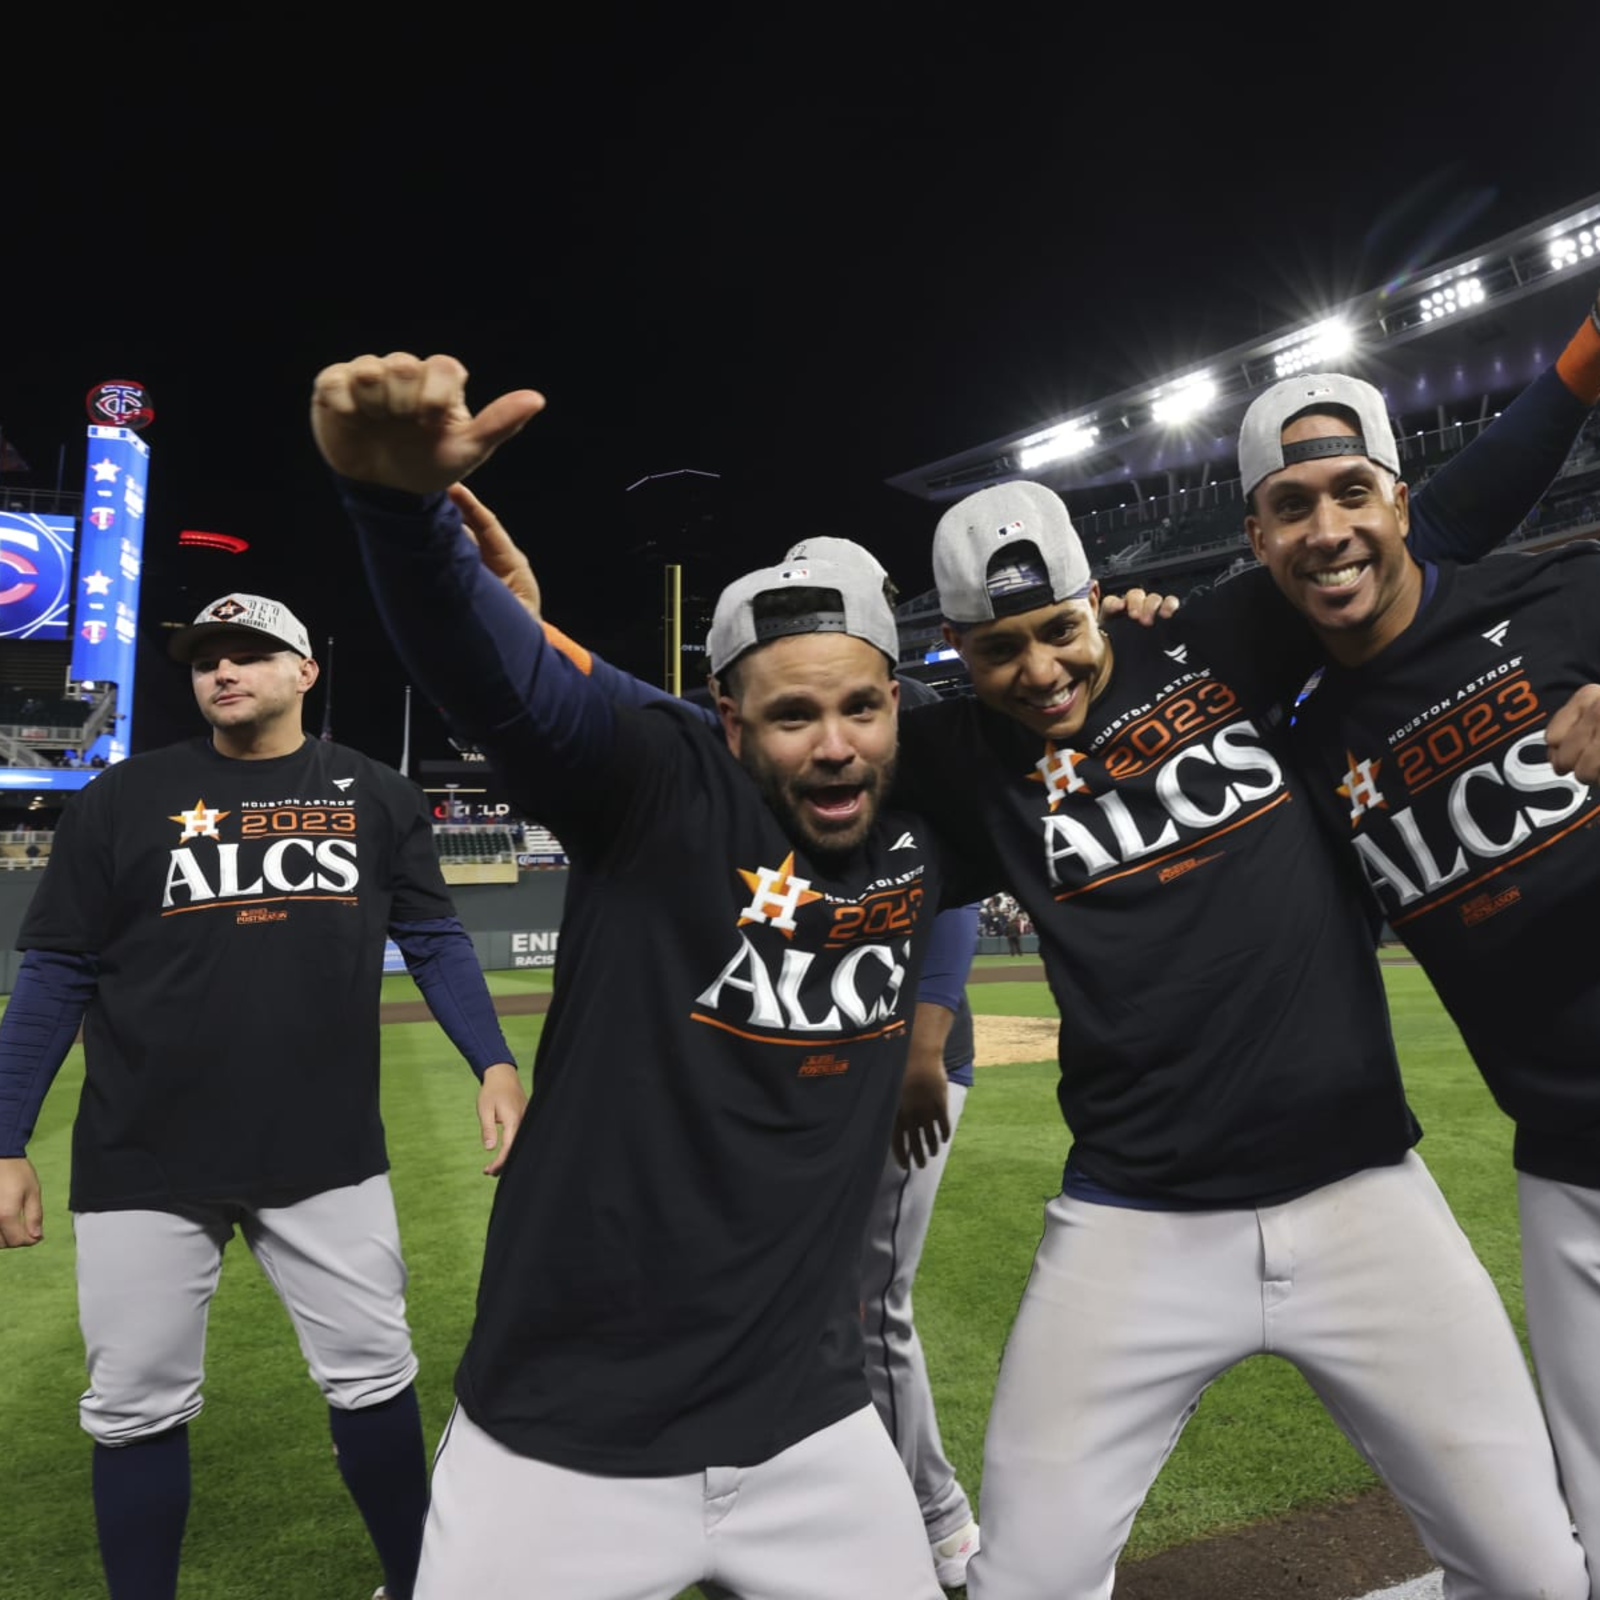 LOOK: Here's what the Astros' World Series championship shirts and